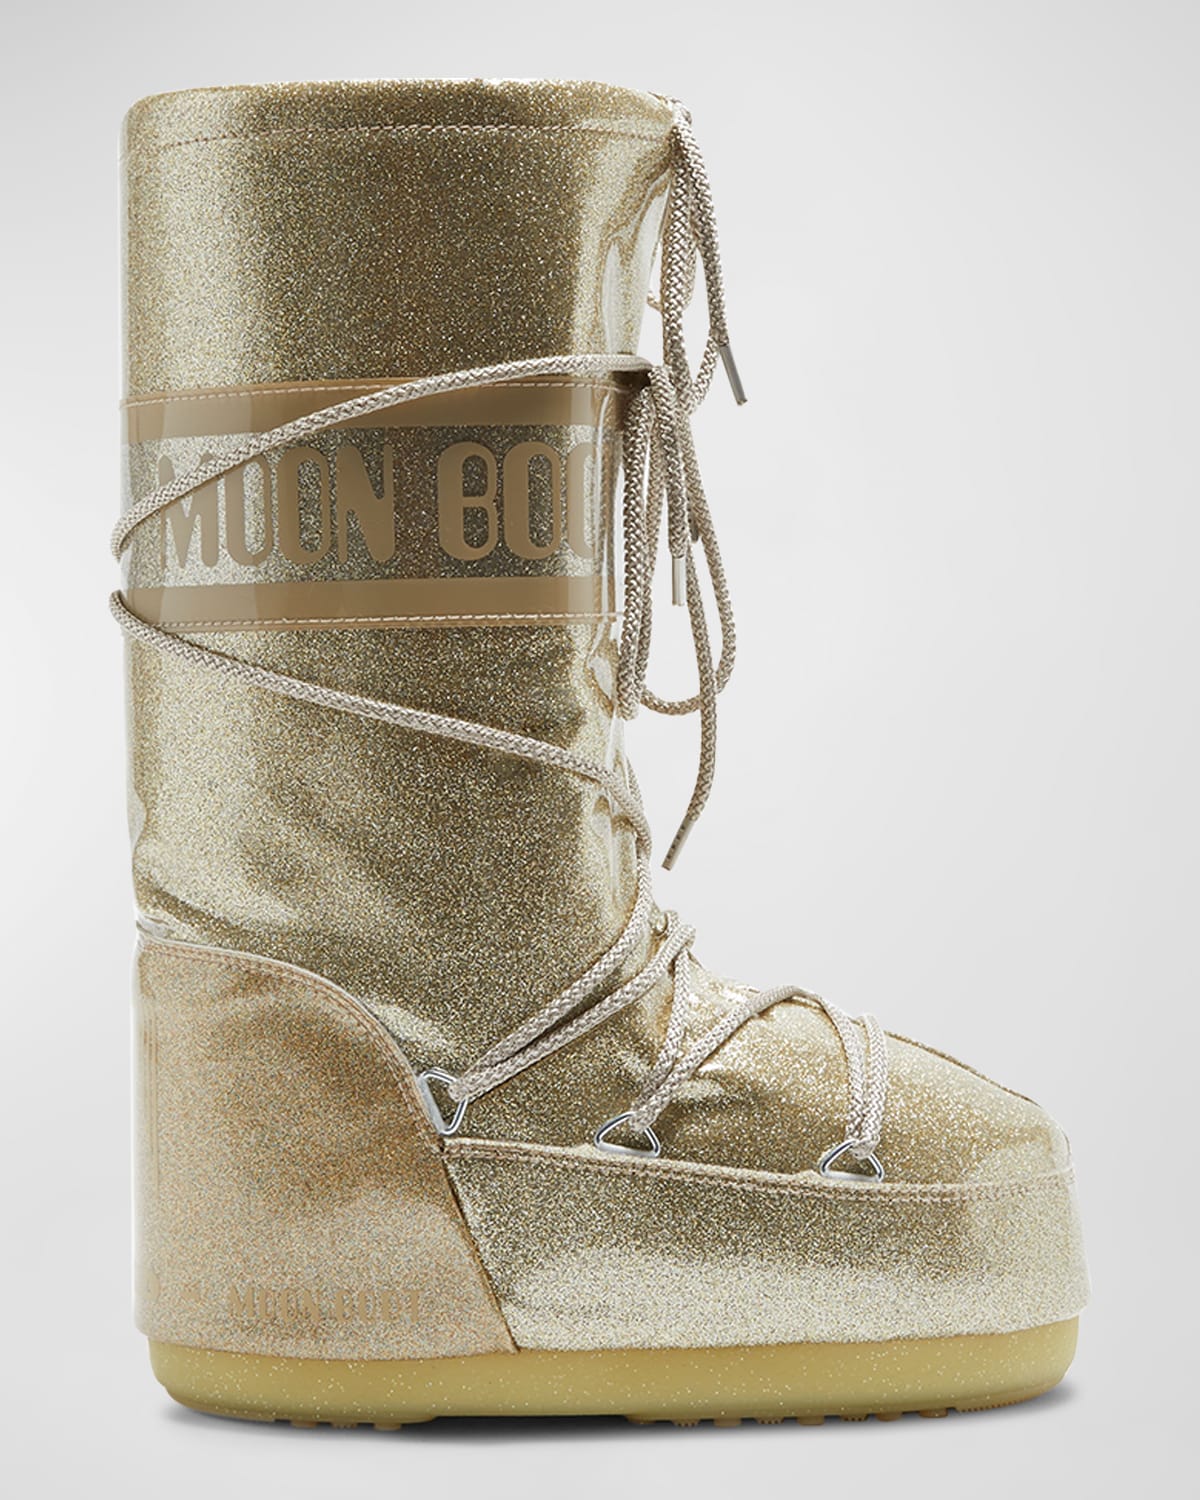 MOON BOOT ICON GLITTER LACE-UP TALL SNOW BOOTS